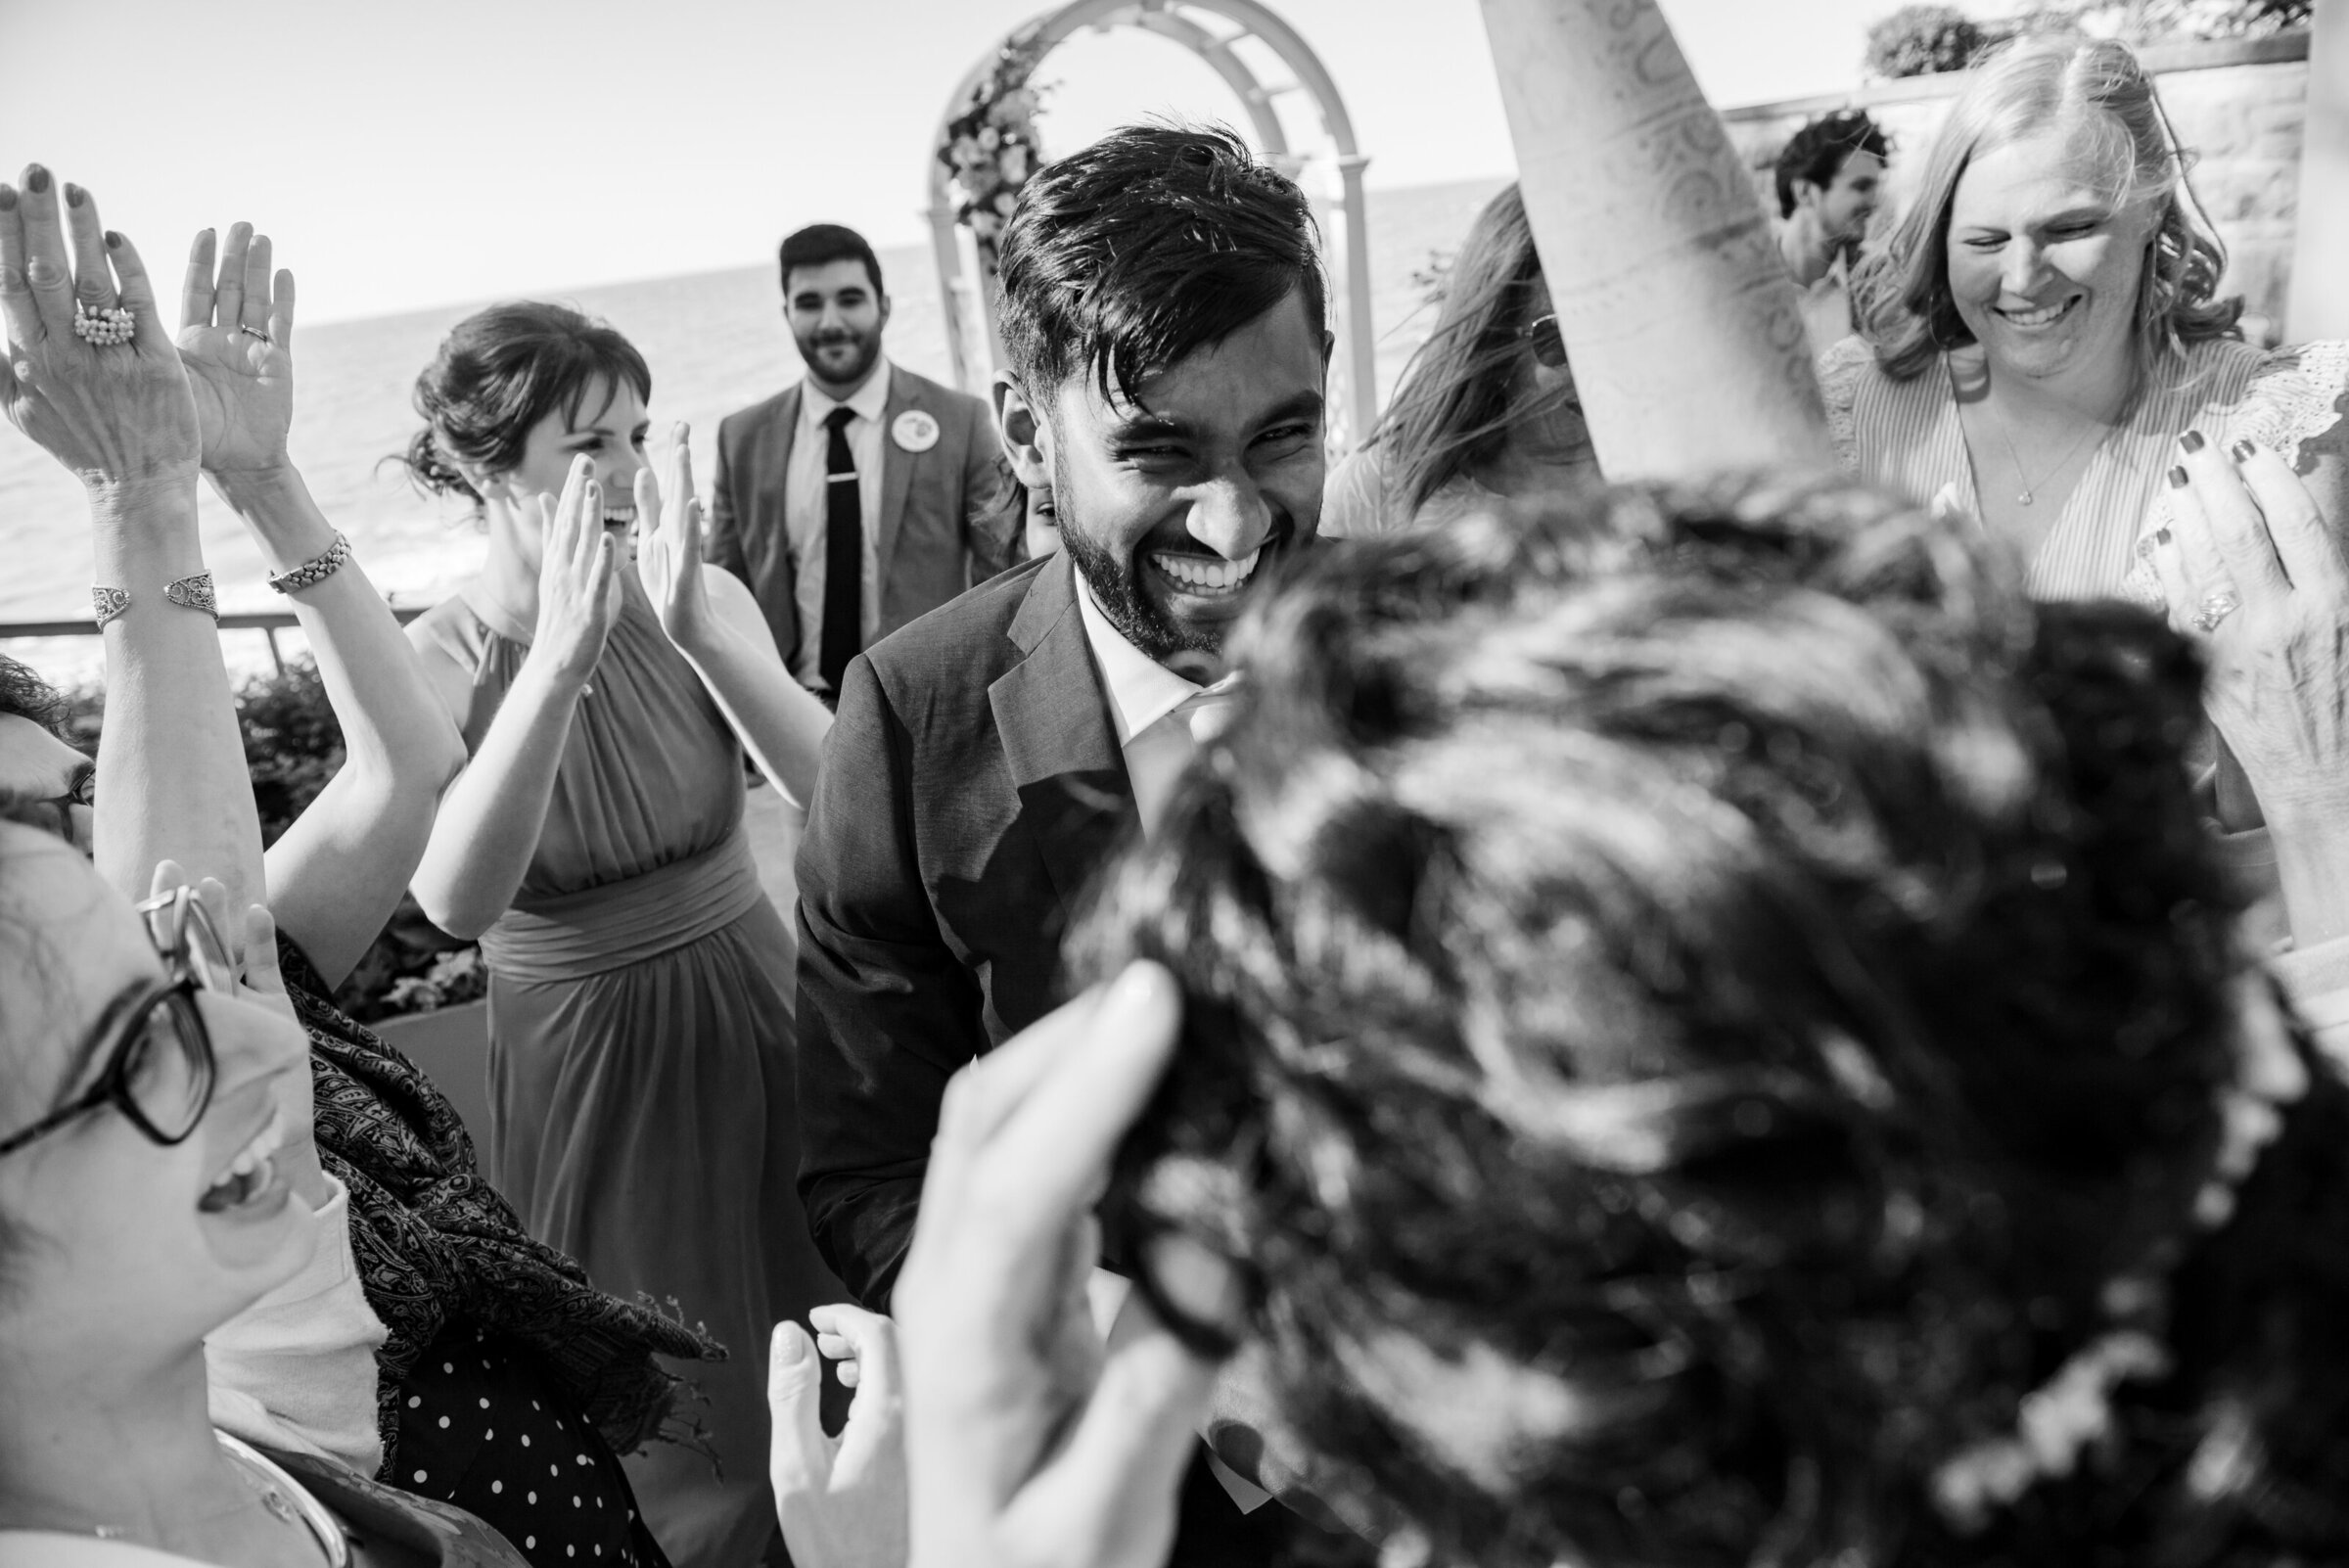 Ohio groom shares a dance with his bride on their wedding day, surrounding by all their friends and family during a private lakeside wedding in Ohio. Photo taken by Columbus Wedding photographer Aaron Aldhizer